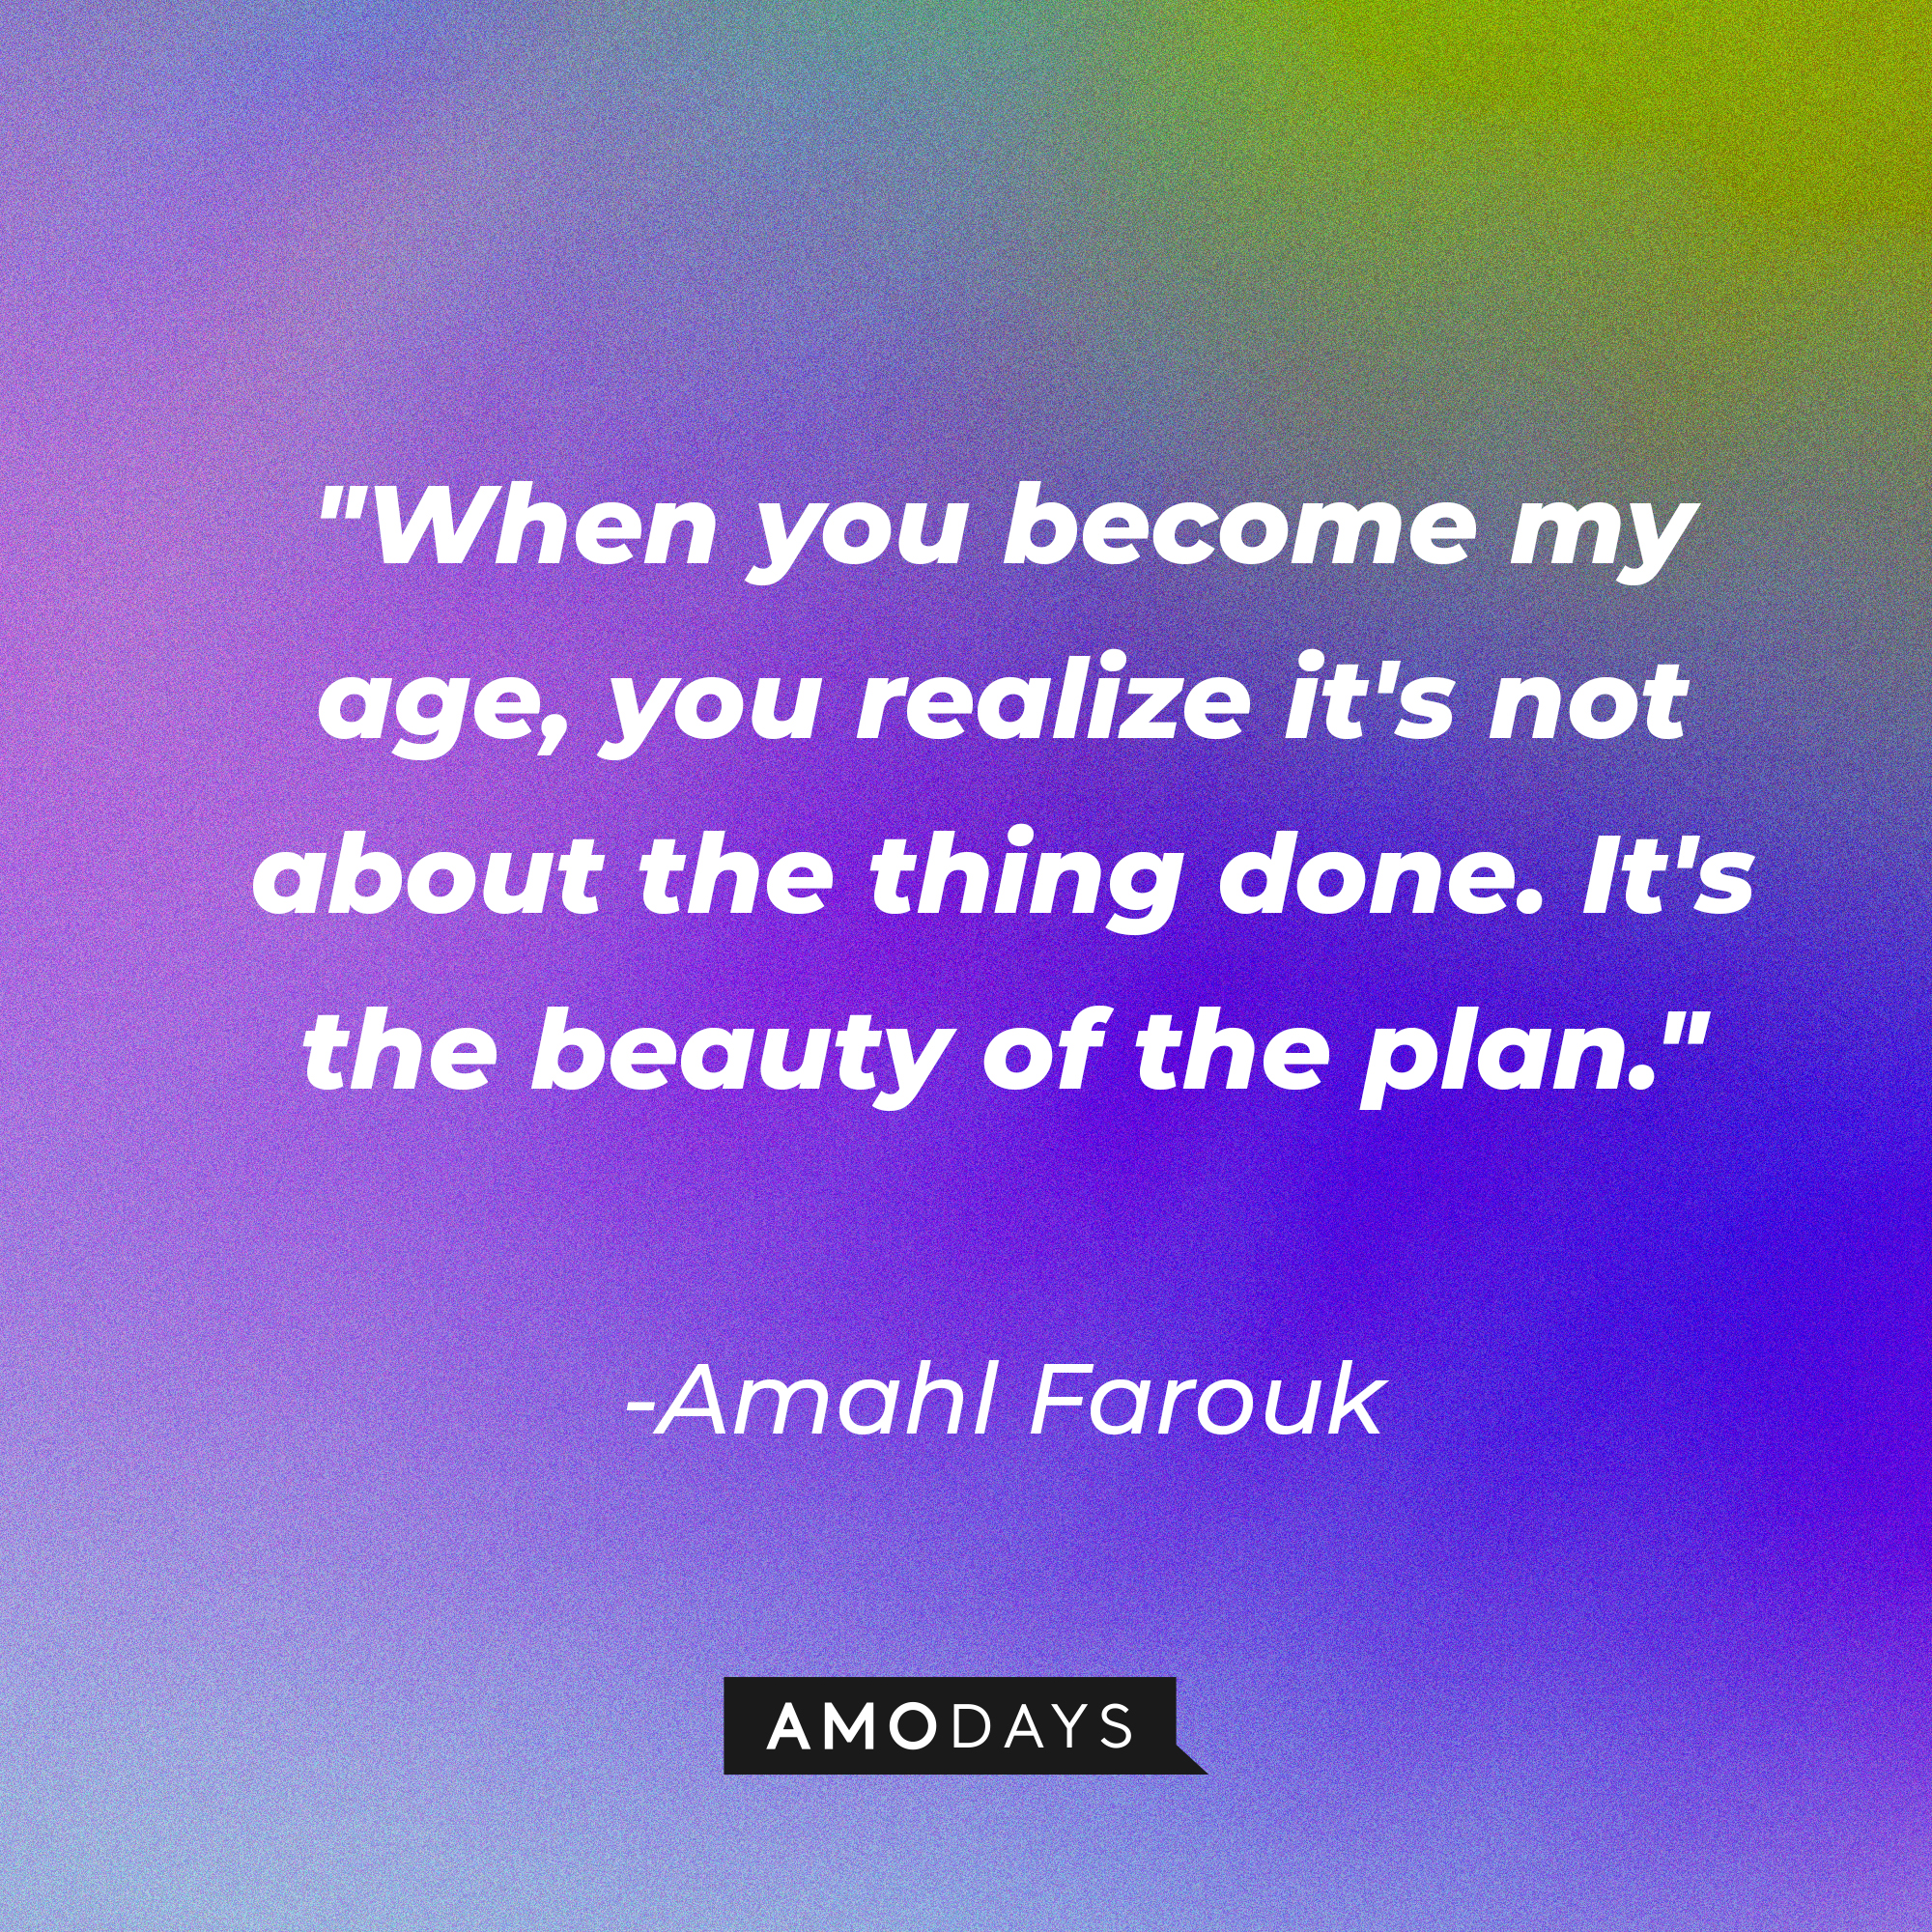 Amahl Farouk's quote: "When you become my age, you realize it's not about the thing done. It's the beauty of the plan." | Image: AmoDays